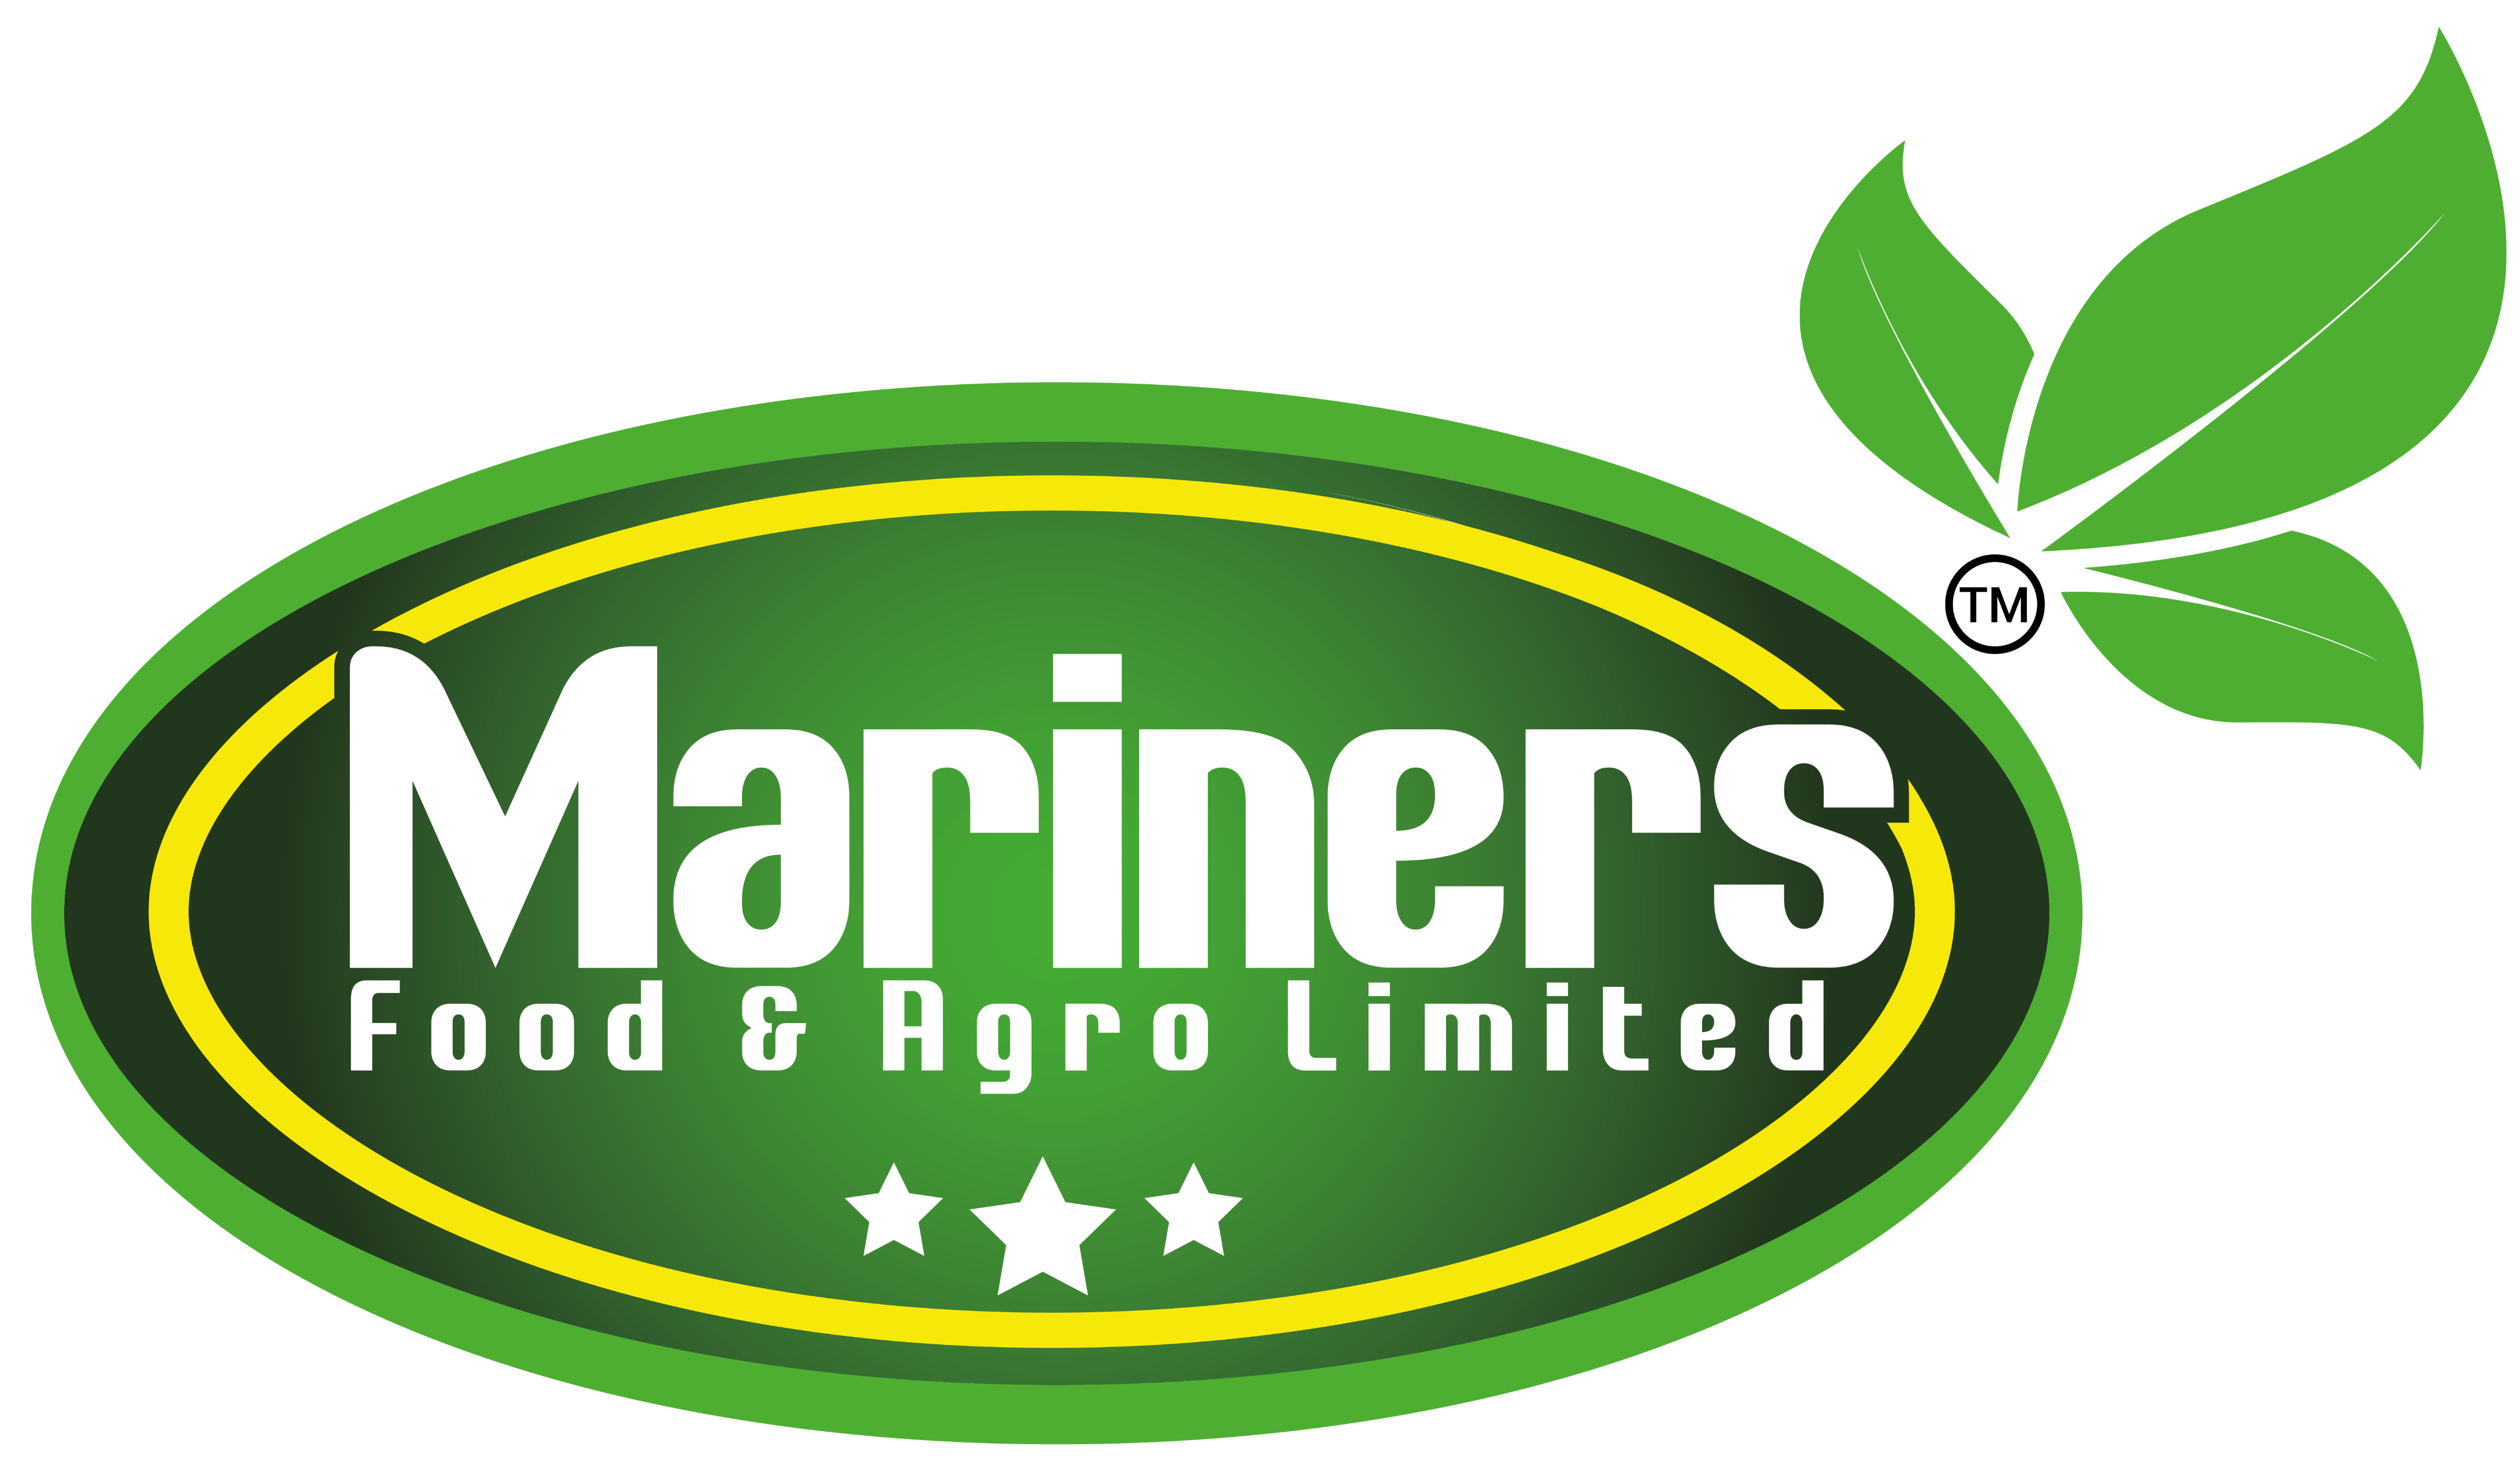 Mariners Food and Agro Limited takes pride in offering premium raw peanuts, sourced from the finest farms, meticulously sorted, and processed to preserve their natural goodness. Packed with nutrients and flavor, our raw peanuts are a versatile and healthy addition . Whether used in snacks, cooking, or as a garnish, customers can trust Mariners Food and Agro Limited to deliver the best quality raw peanuts for a delightful food experience.